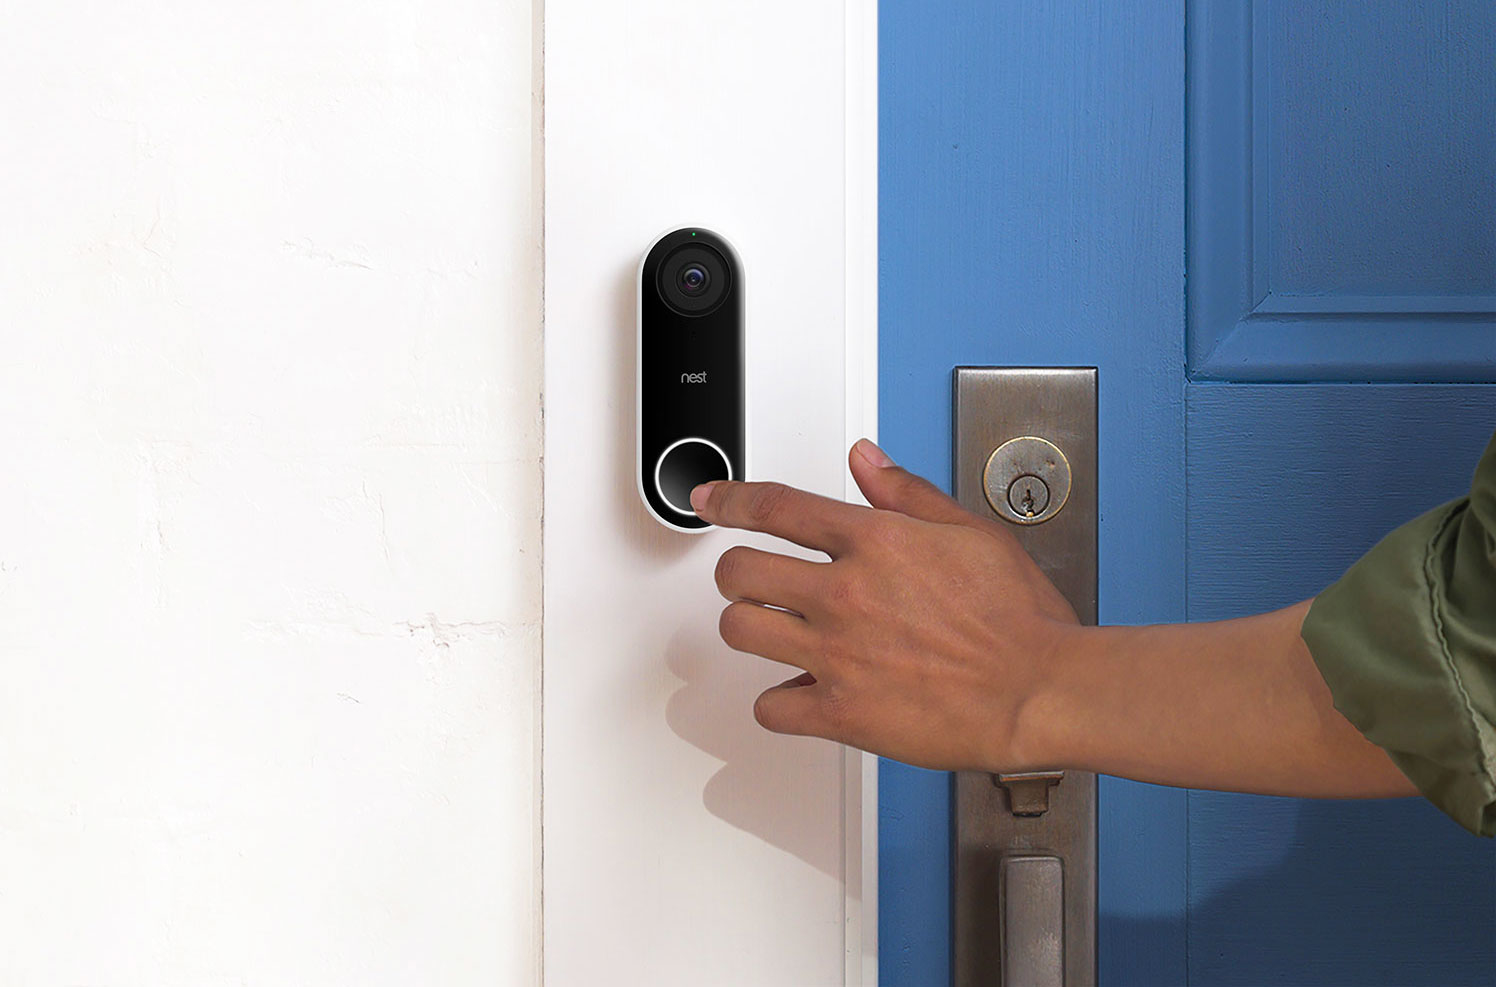 A doorbell was created, independently distinguishing "its" and "others"